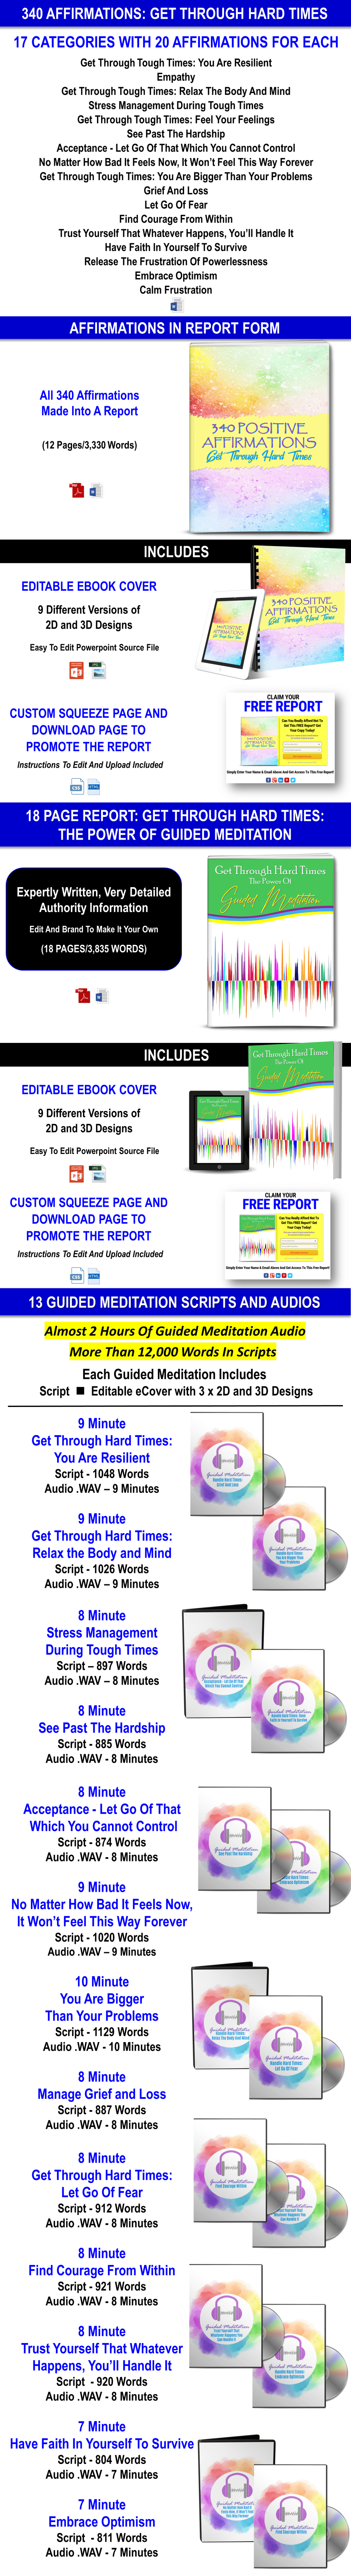 Affirmations + 13 Guided Meditations Get Through Hard Times - PLR Rights